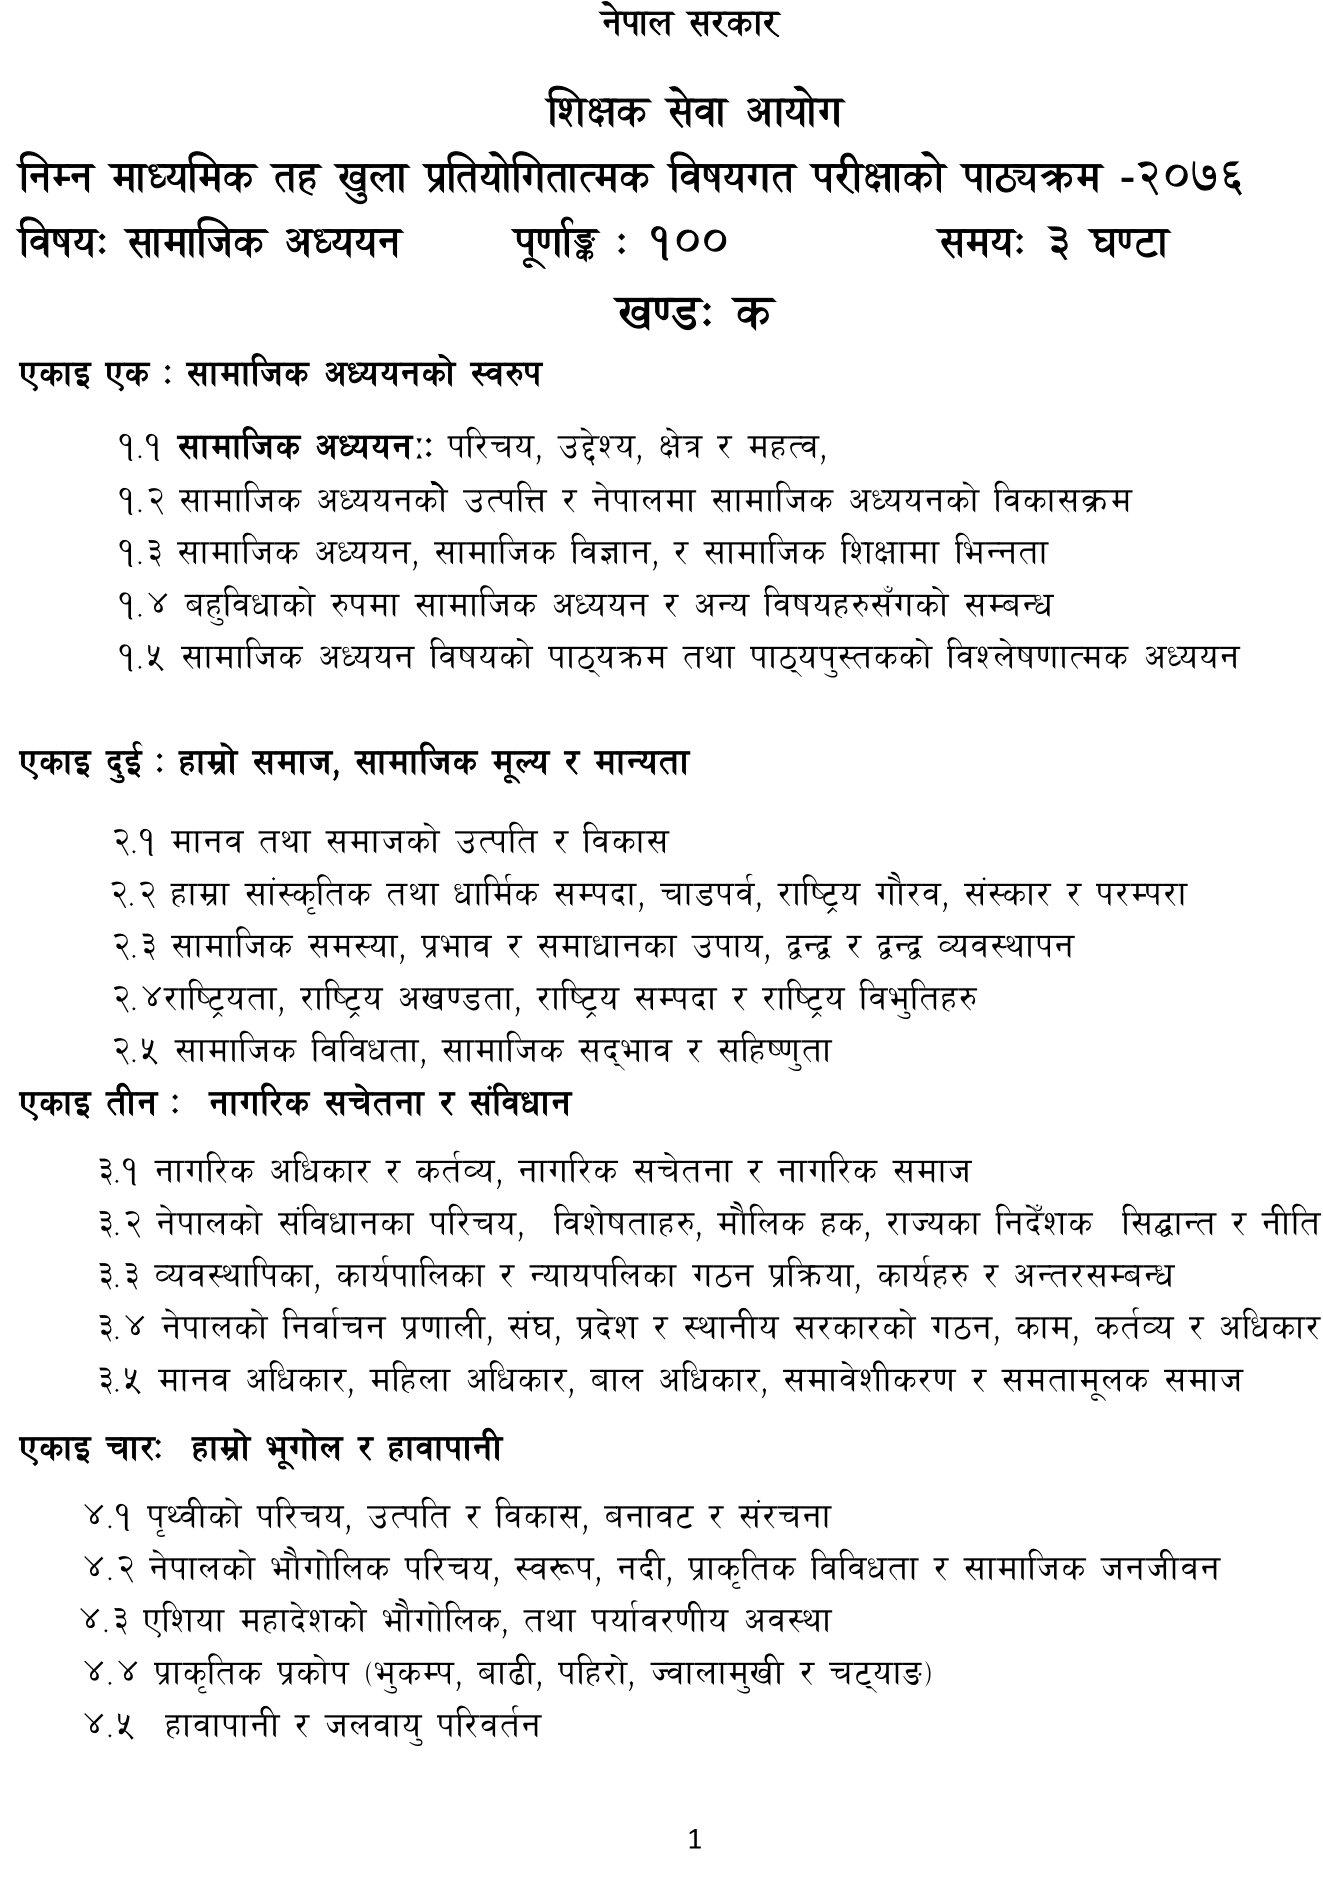 Shikshak Sewa Aayog Curriculum of Lower Secondary Level Social Subject:- We will put the Shikshak Sewa Aayog (TSC) lower secondary level Social Subject Exam syllabus in this post.